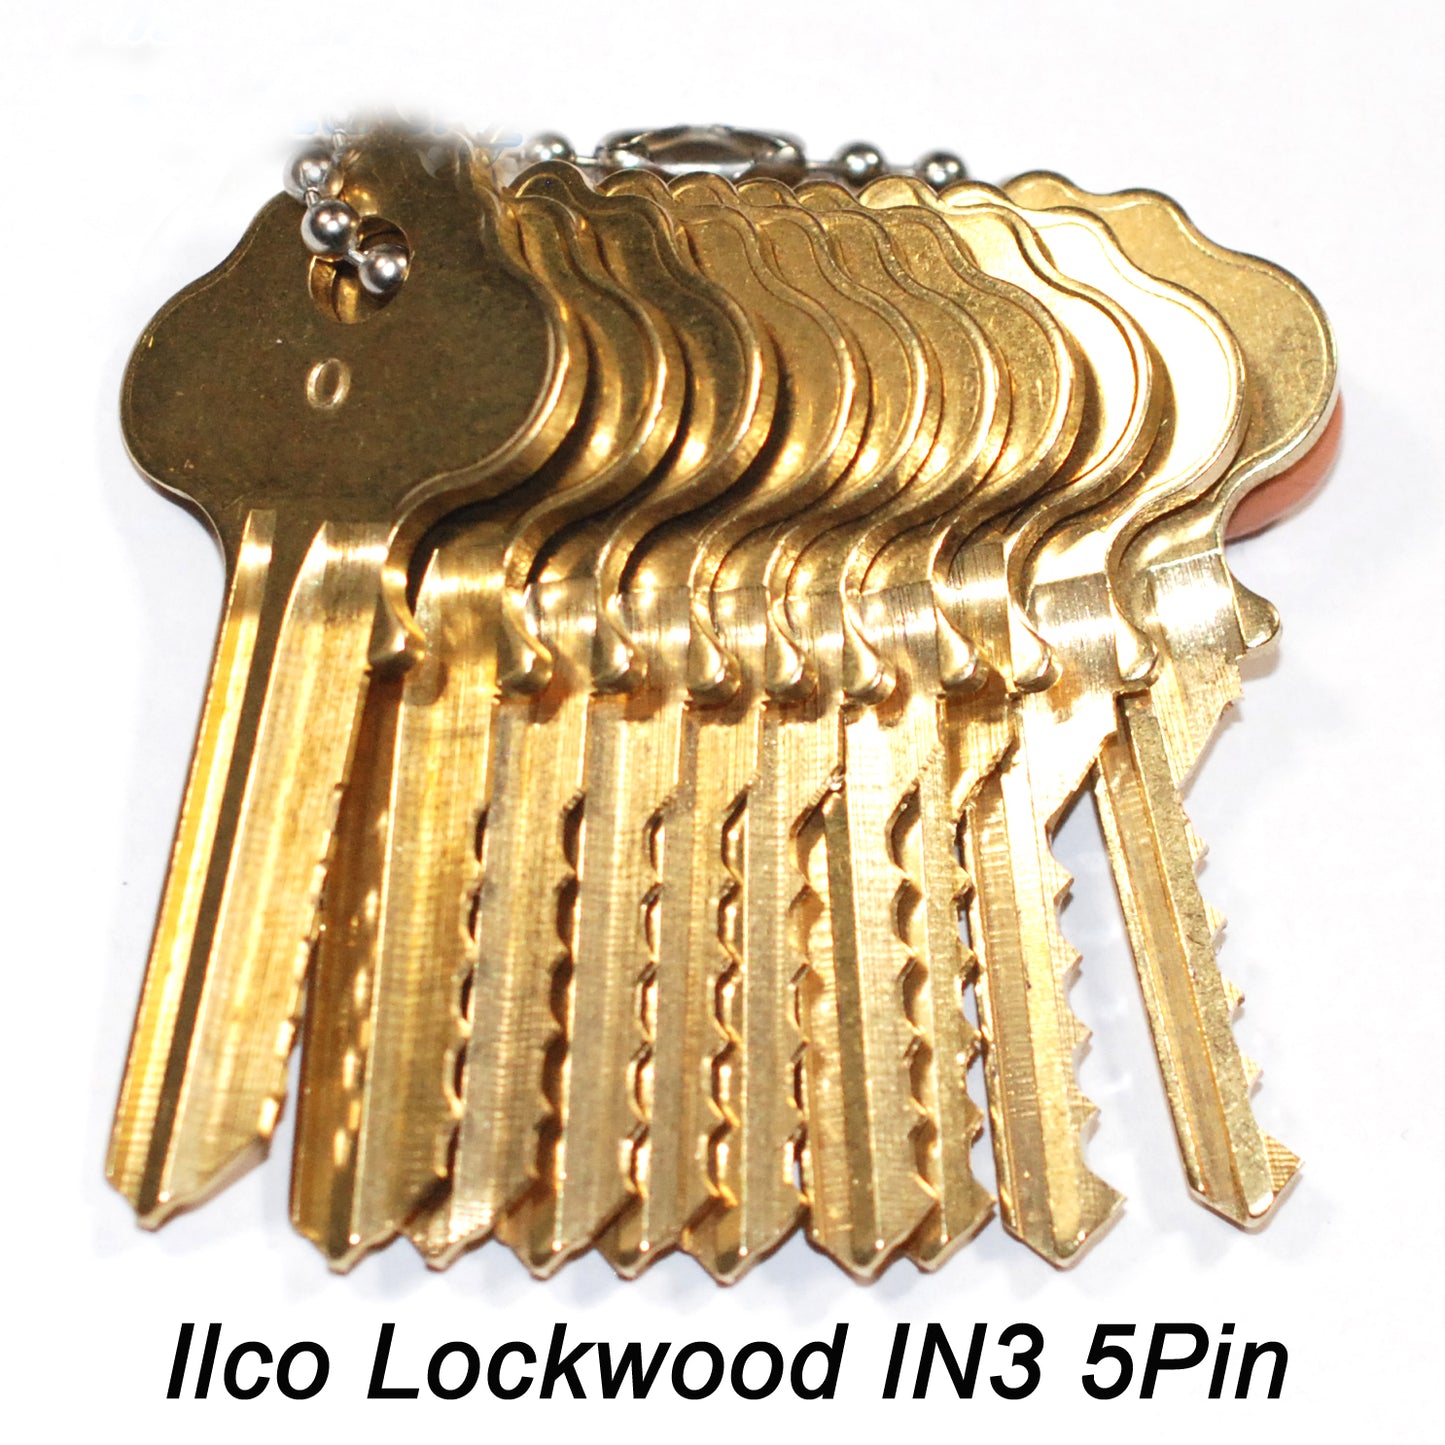 Ilco Lockwood IN3 Space and Depth Keys ~ DSD#043, C28